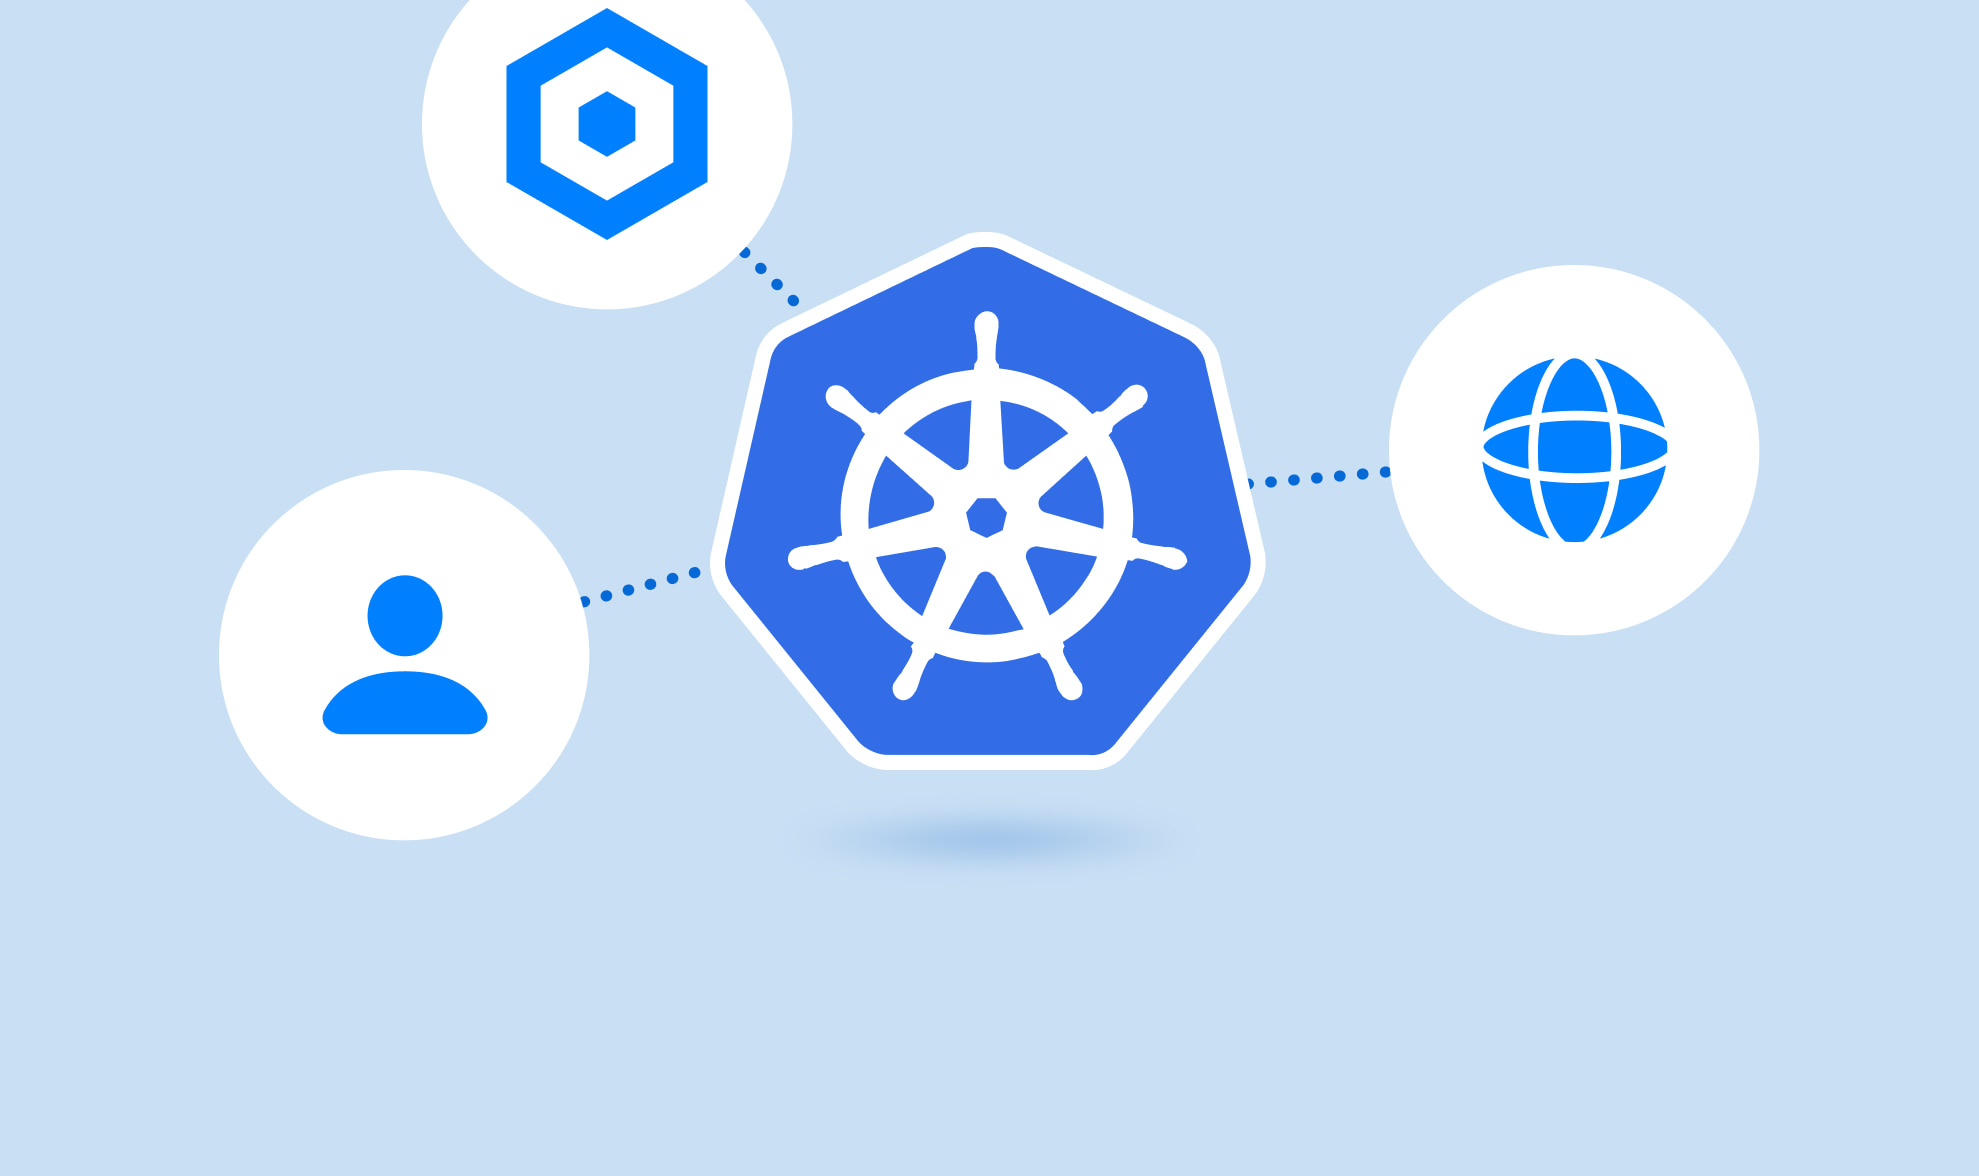 Kubernetes was designed for functionality, not security, but it does include several key settings and policies. Learn more about Kubernetes and Security.